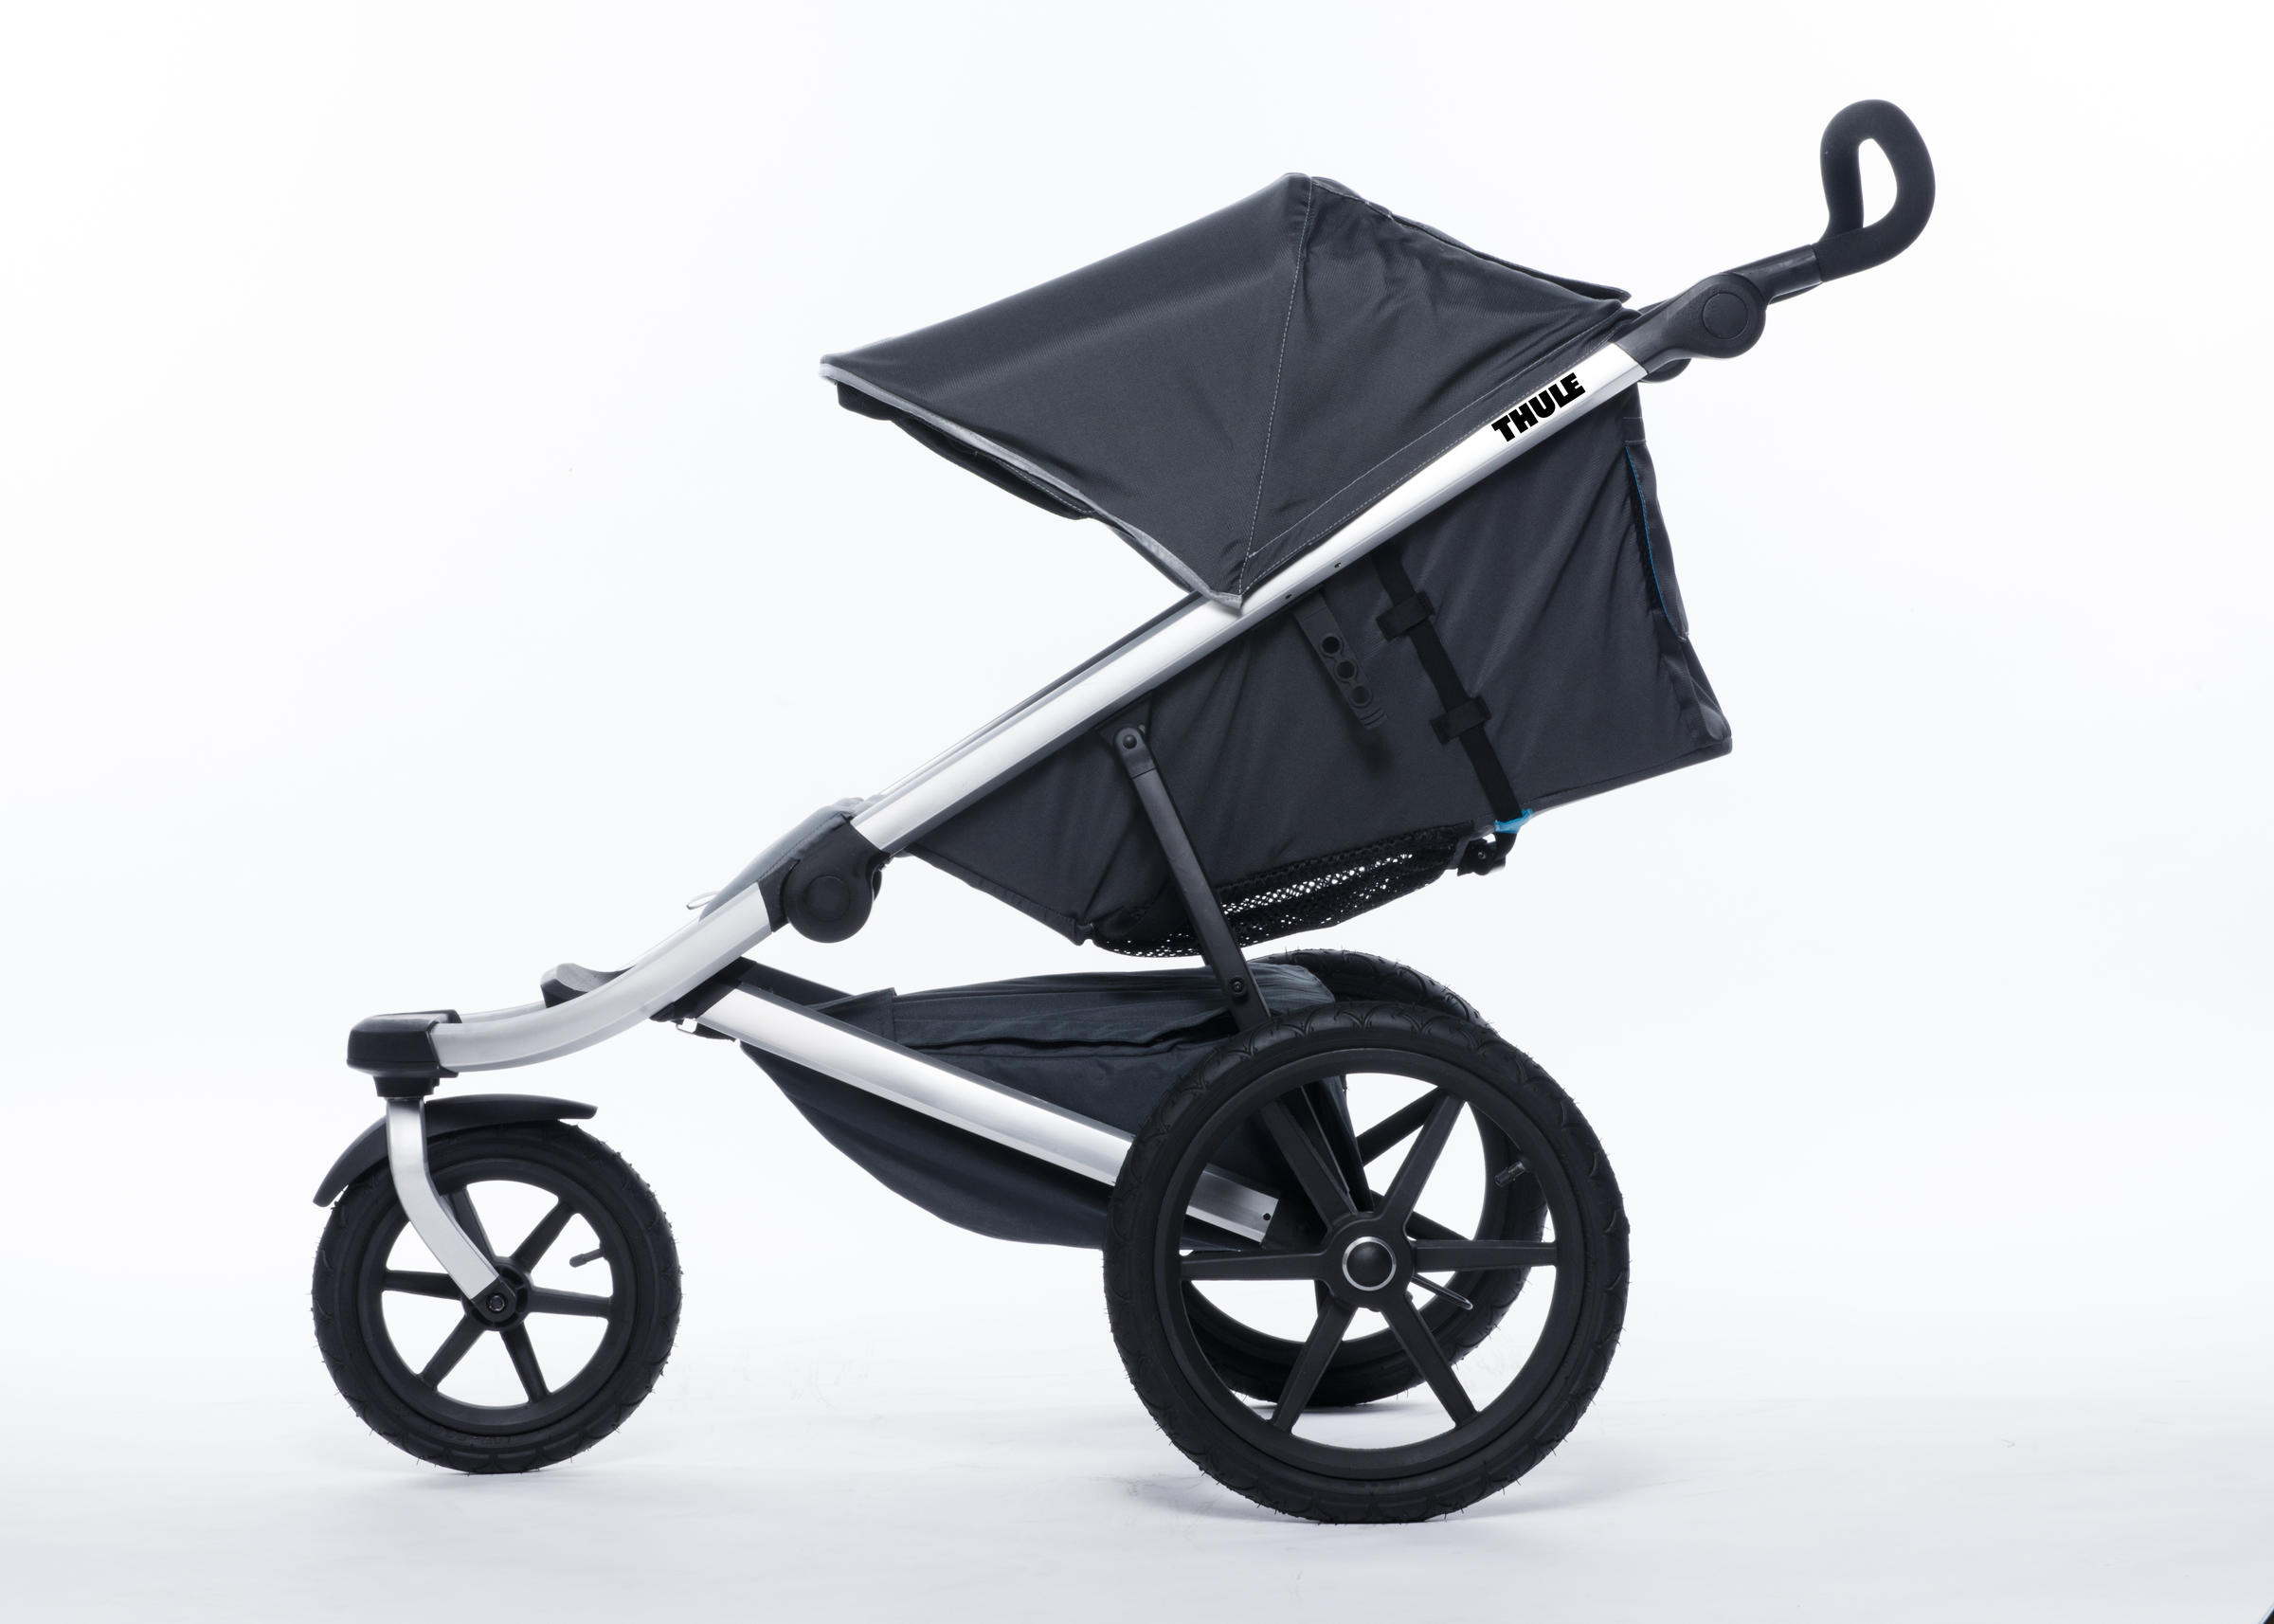 Thule Urban Glide 1 - Montgomery Cyclery